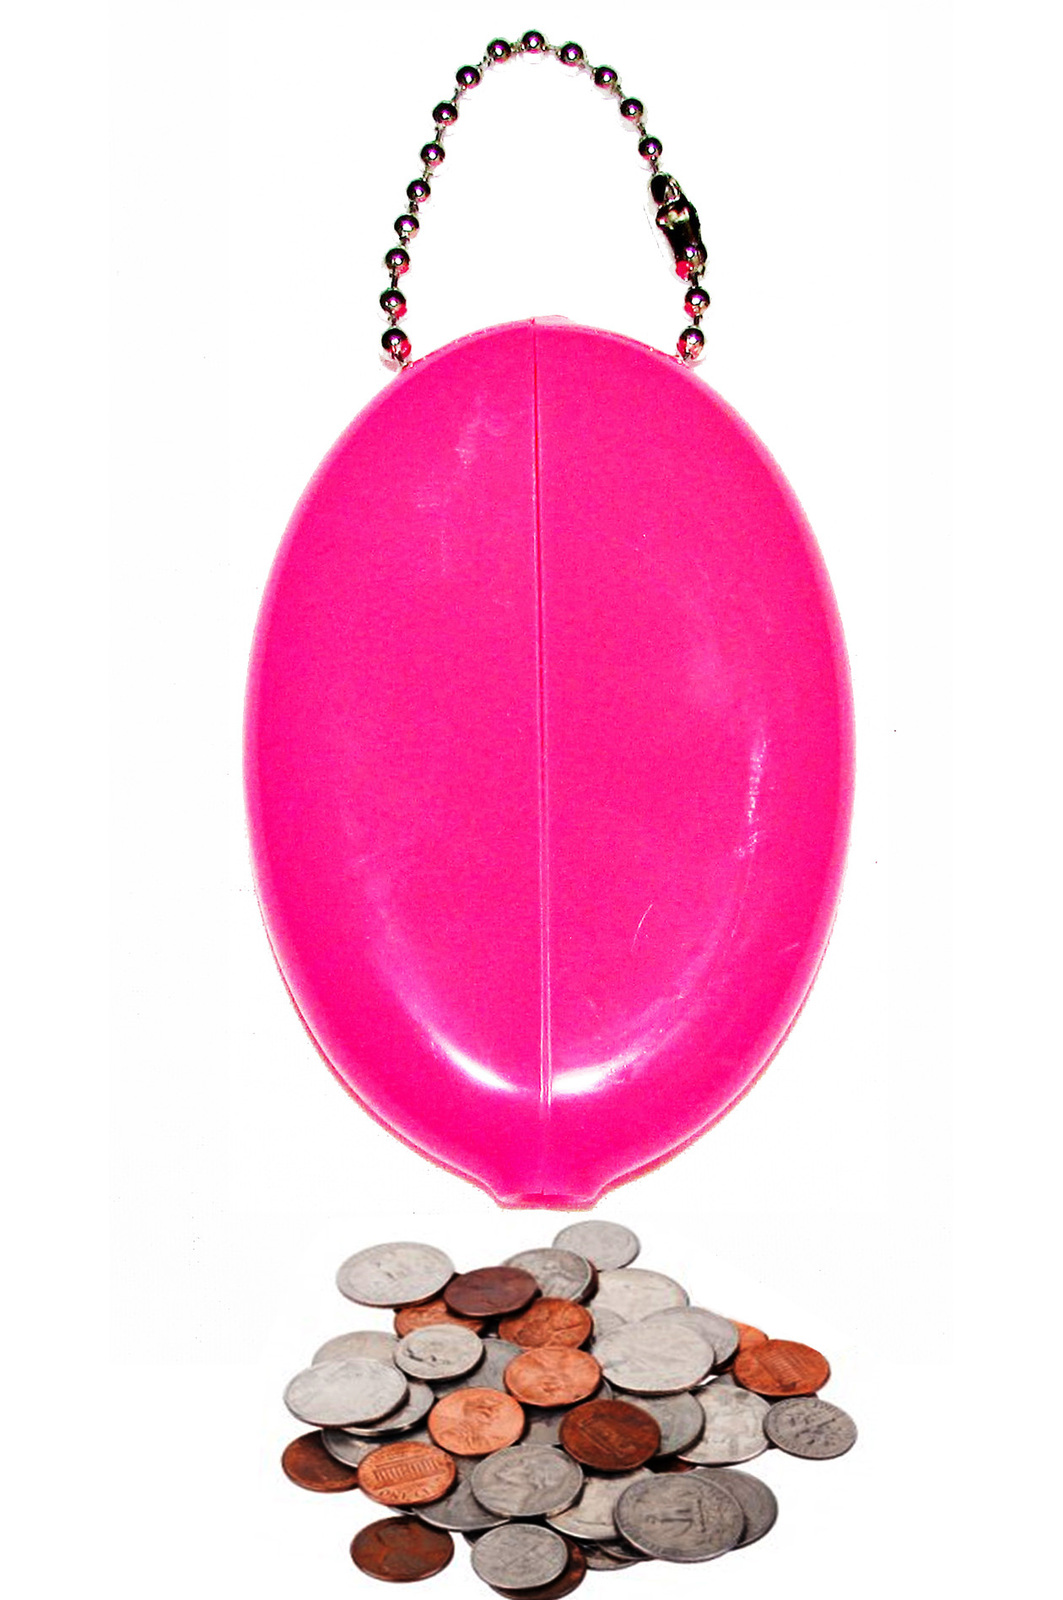 3 PINK RUBBER SQUEEZE COIN HOLDER KEYCHAIN MONEY CHANGE PURSE OVAL DURABLE NEW - Keychains